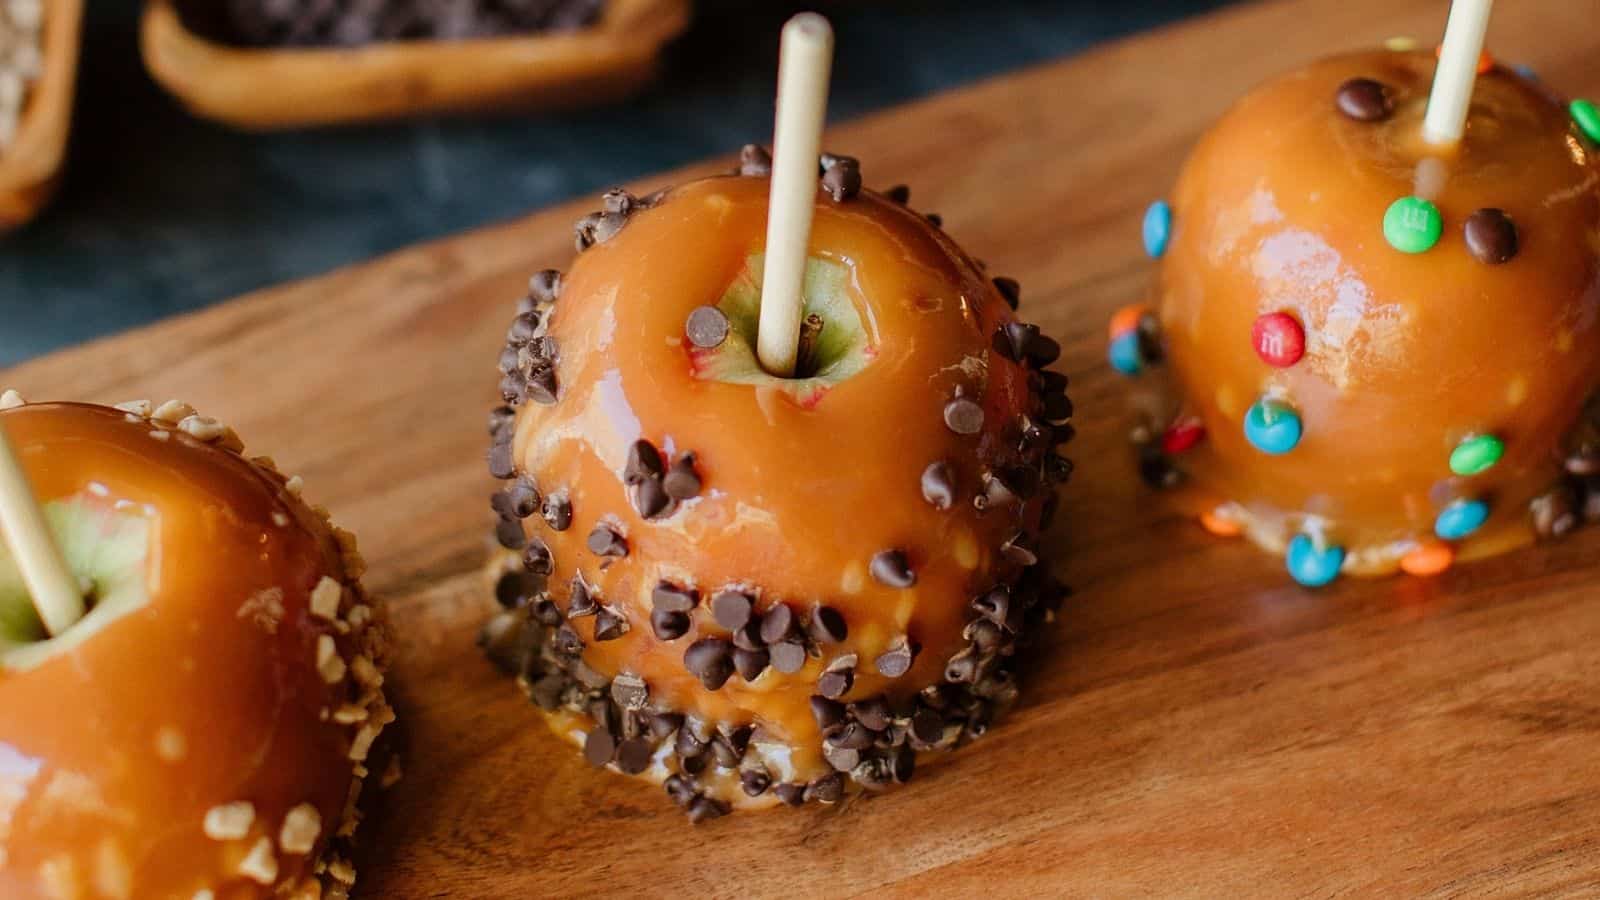 Professional Caramel Apples displayed on a wooden board.